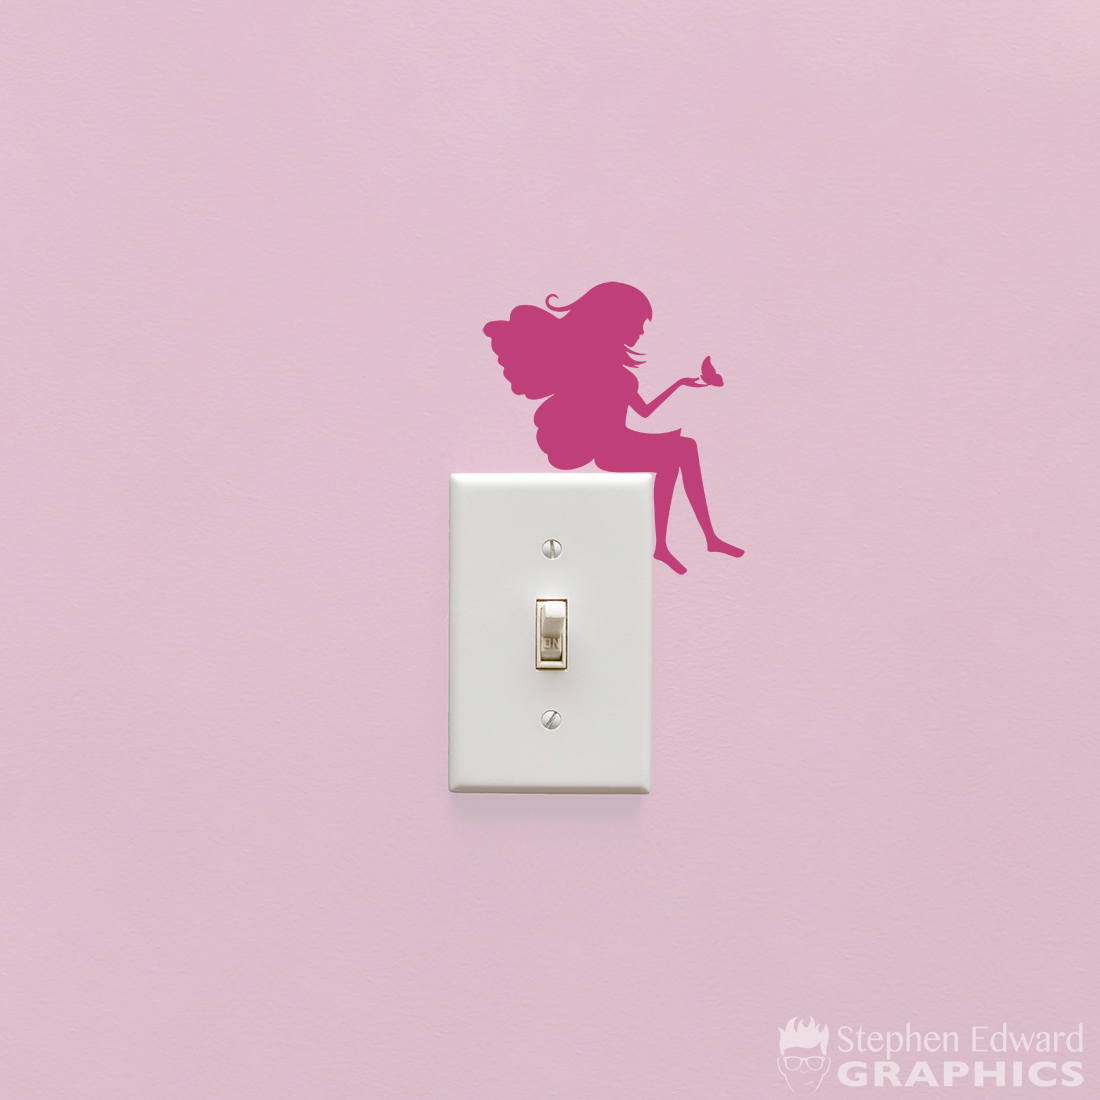 Fairy Light Switch Decal - Lightswitch Faerie Decal - Light Switch Cover decor